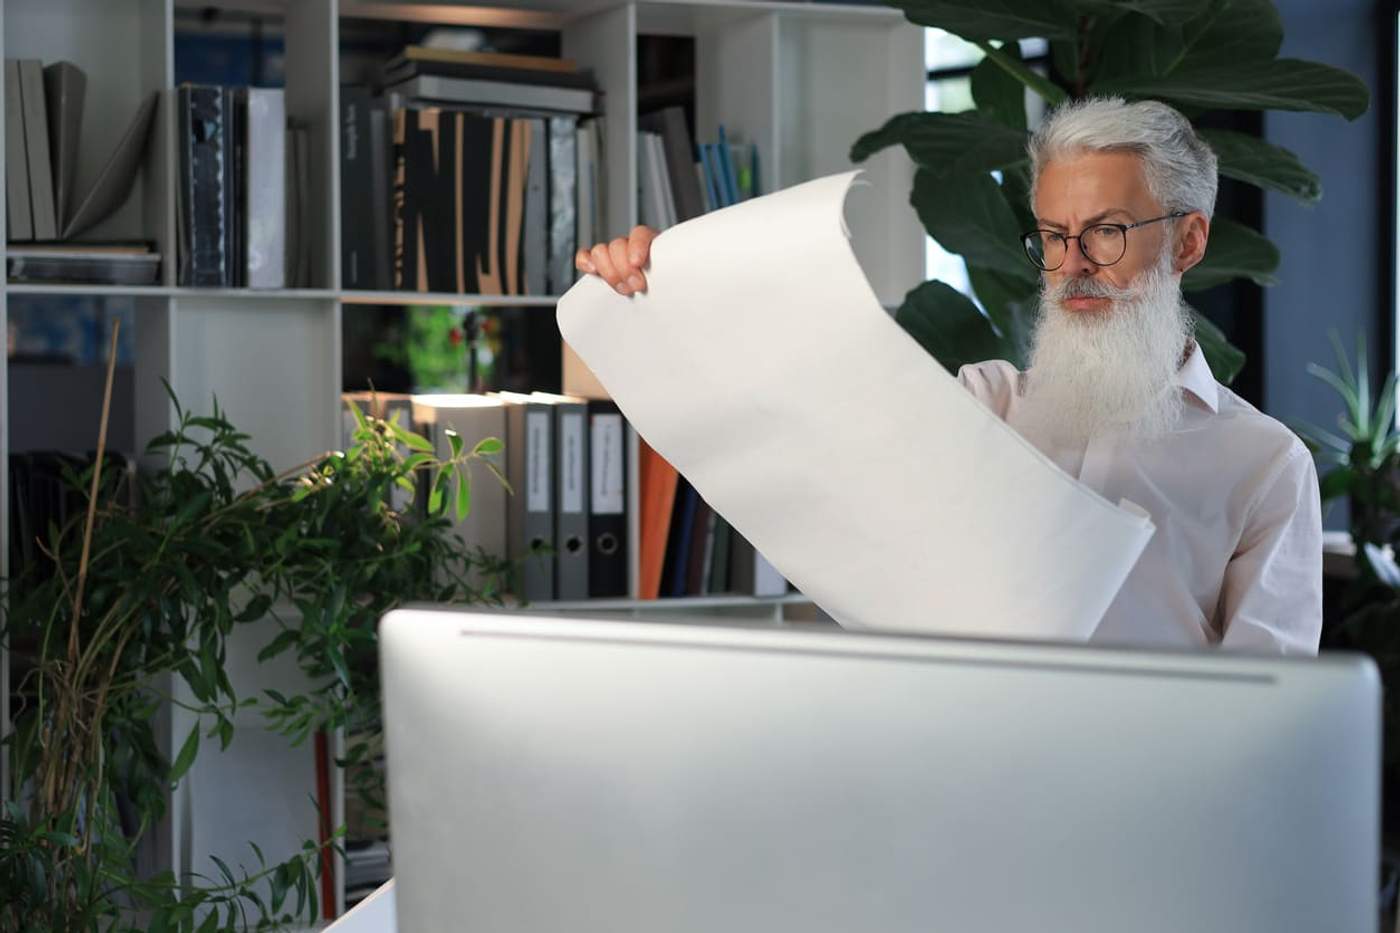 Office worker reviewing a large printout after buying the best budget printer for small business operations